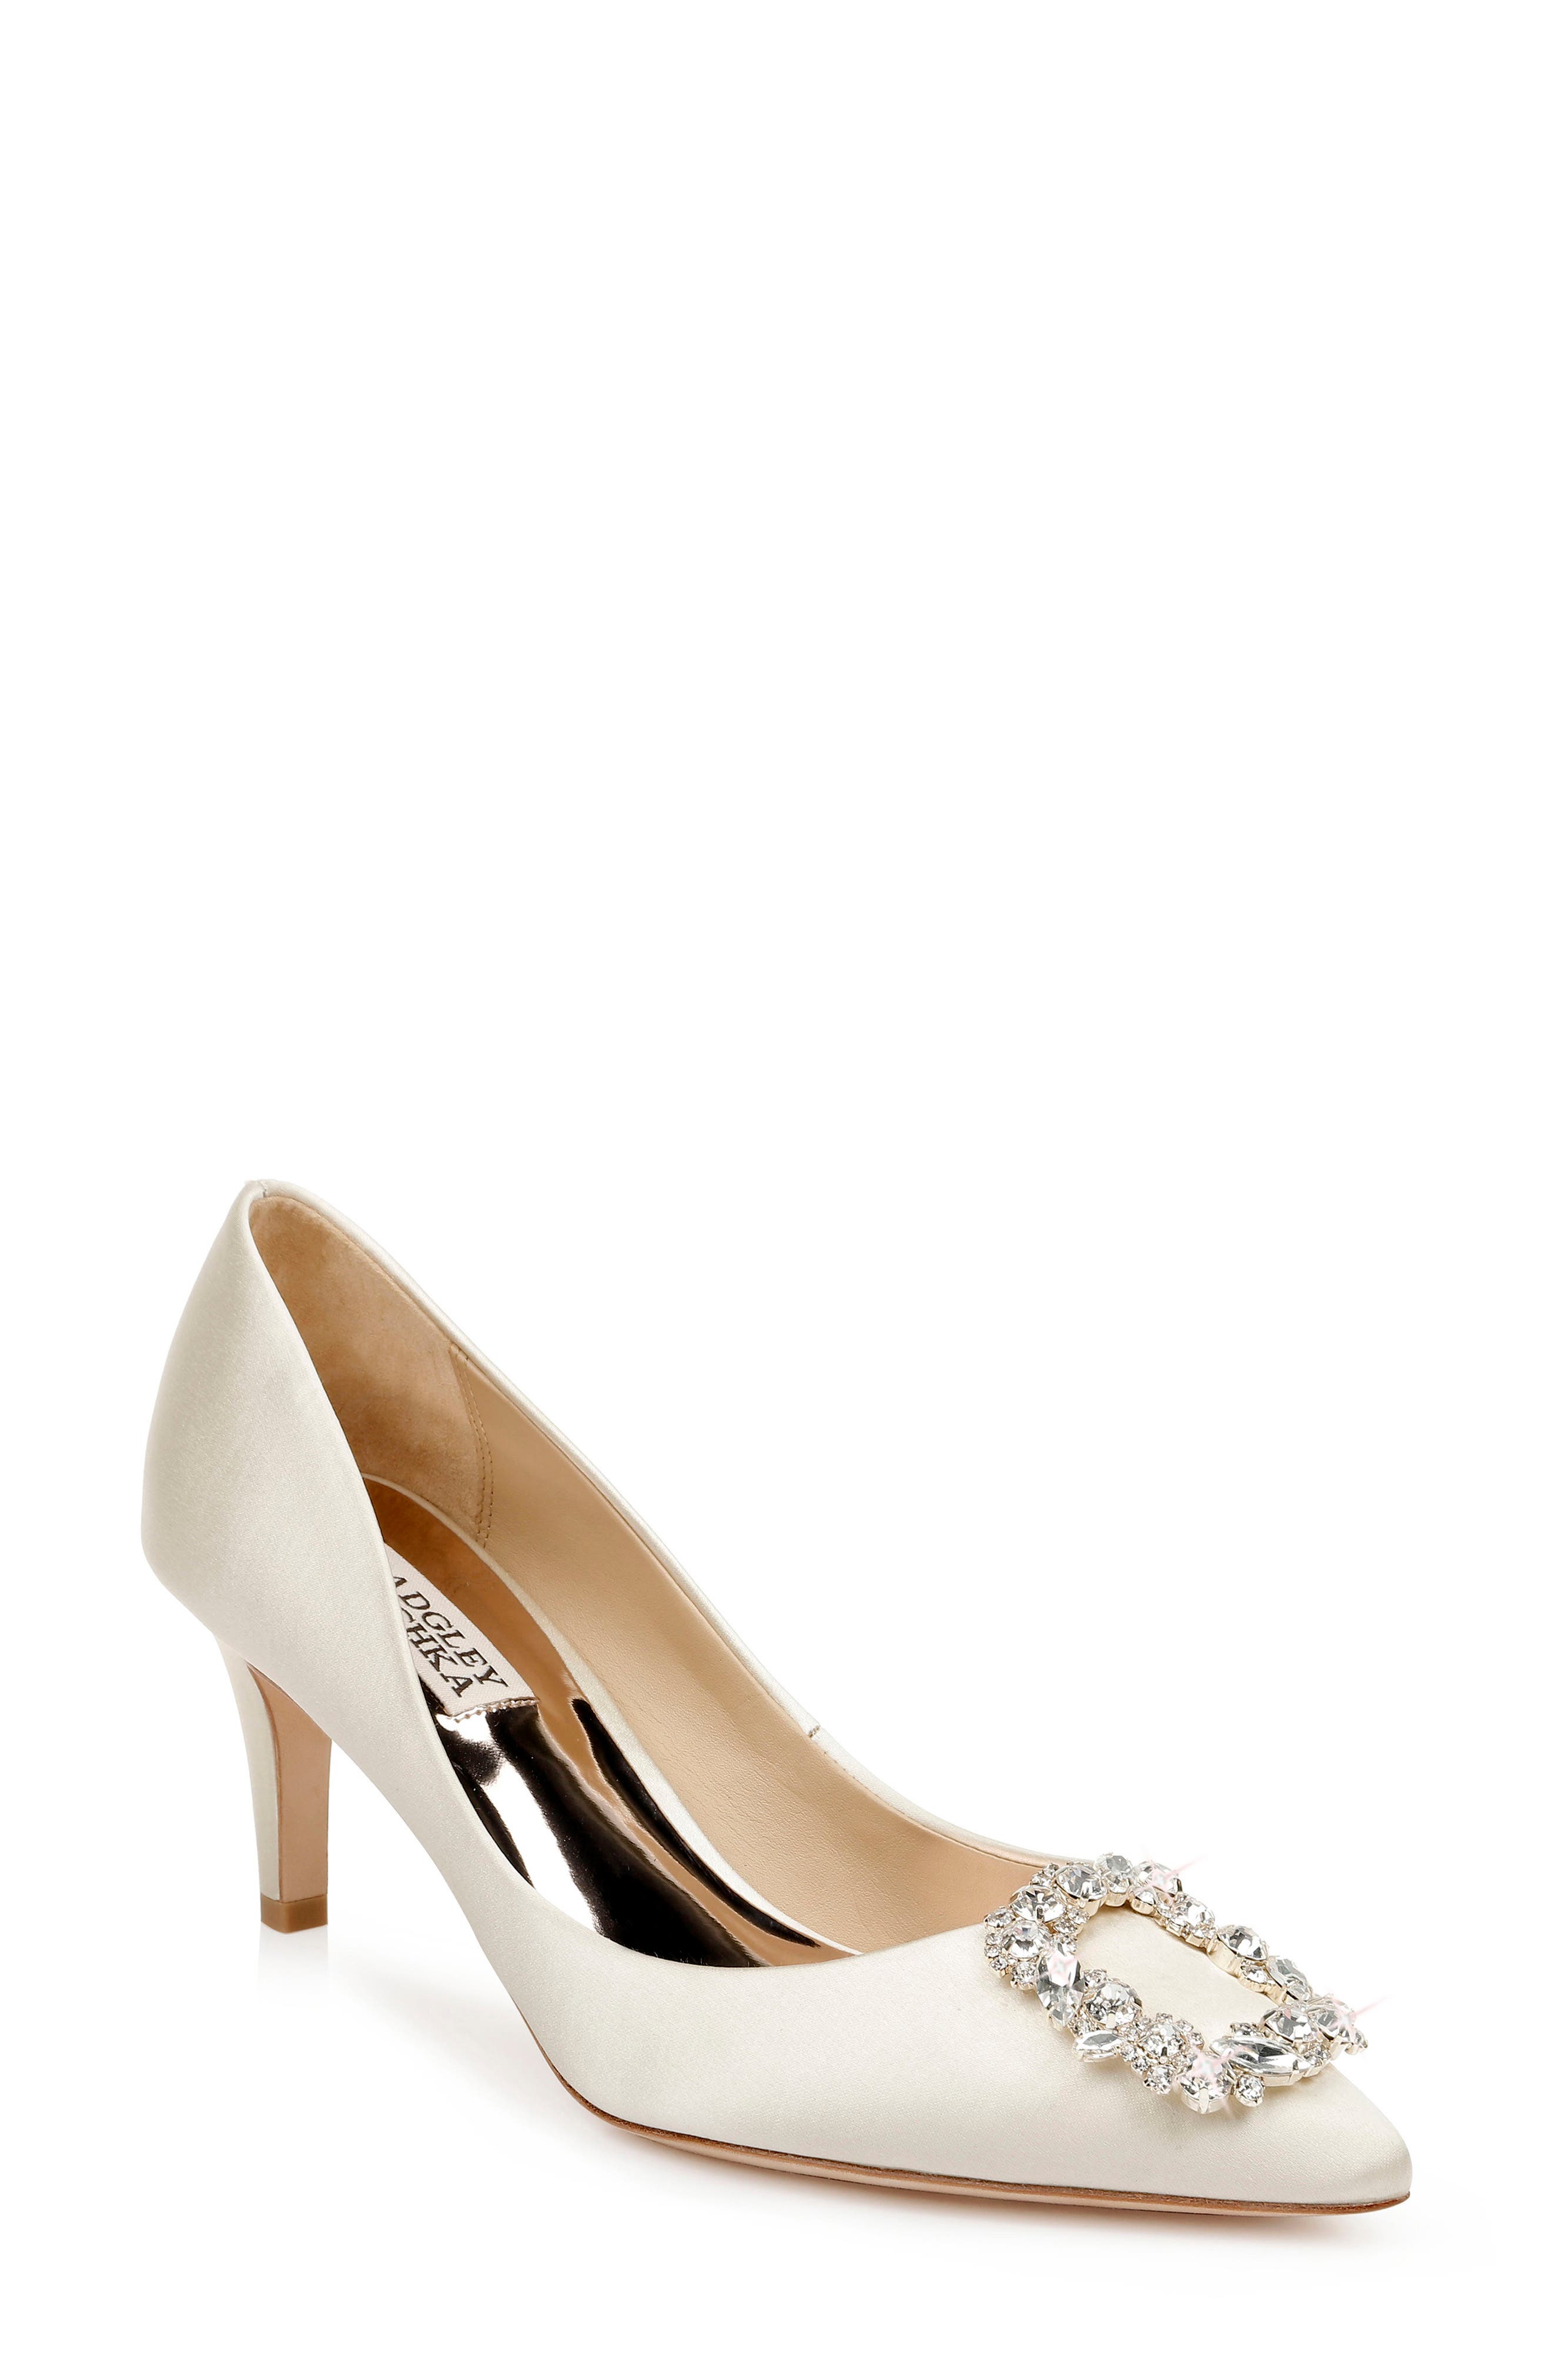 Badgley Mischka Collection Carrie Crystal Embellished Pump in Black Satin